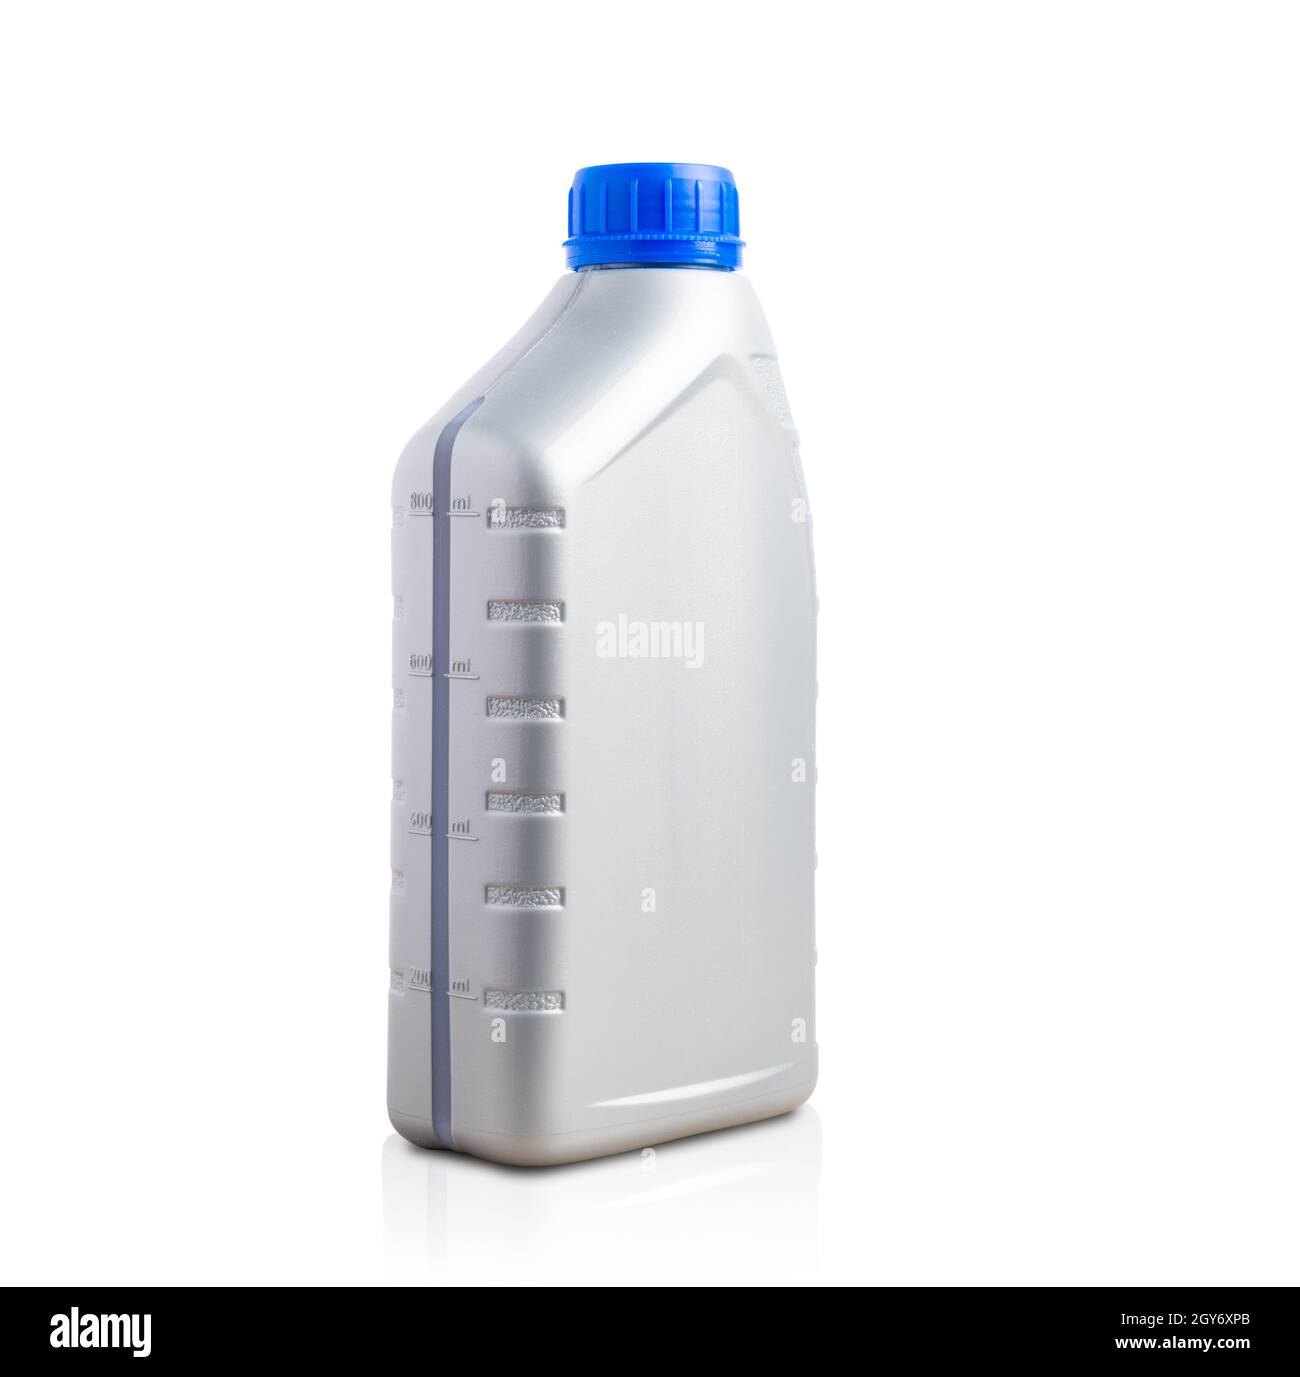 https://c8.alamy.com/comp/2GY6XPB/gray-plastic-can-machine-lubricating-oil-bottle-1-liter-with-a-blue-cap-for-machine-engine-isolated-on-over-white-background-with-clipping-path-2GY6XPB.jpg